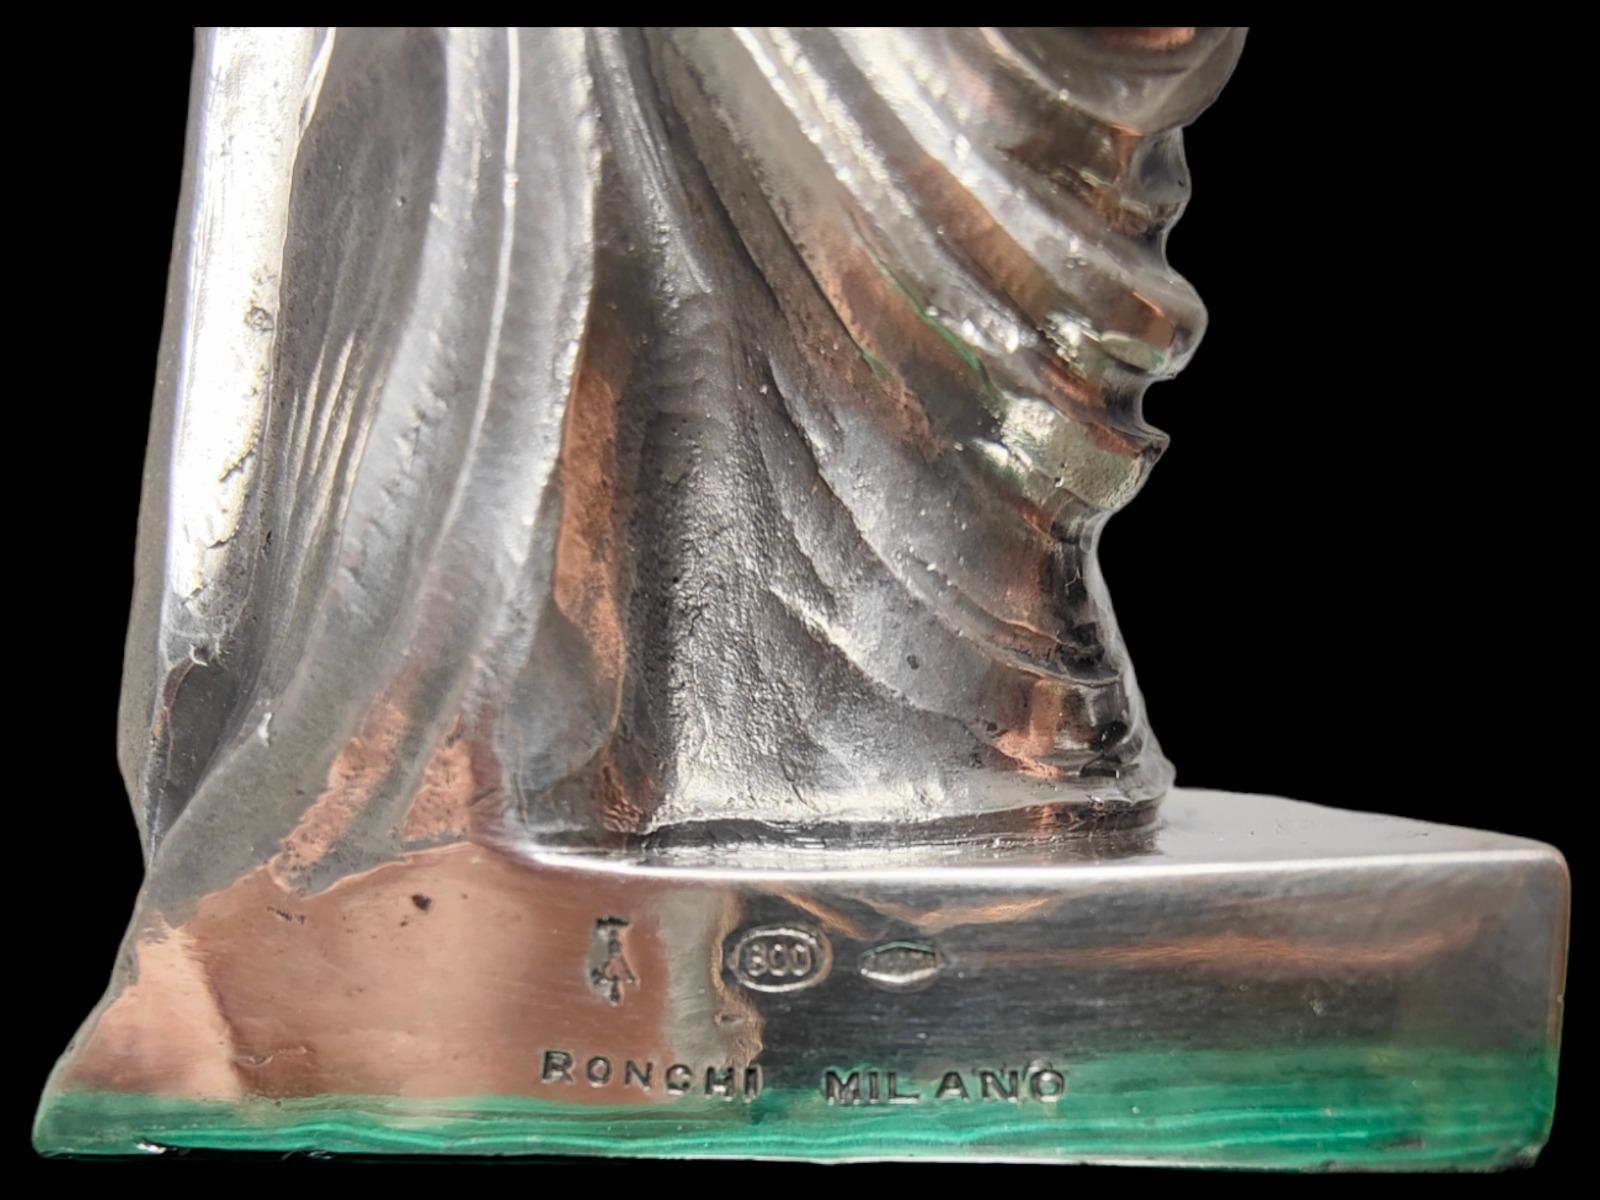 Sculpture of venus in solid silver
Elegant sculpture of the roman goddess Venus on a malachite pedestal. The sculpture is made of solid silver and is punched. Milano first half of the 20th century. Measures: 31 x 9 x 9 cm
Good condition.